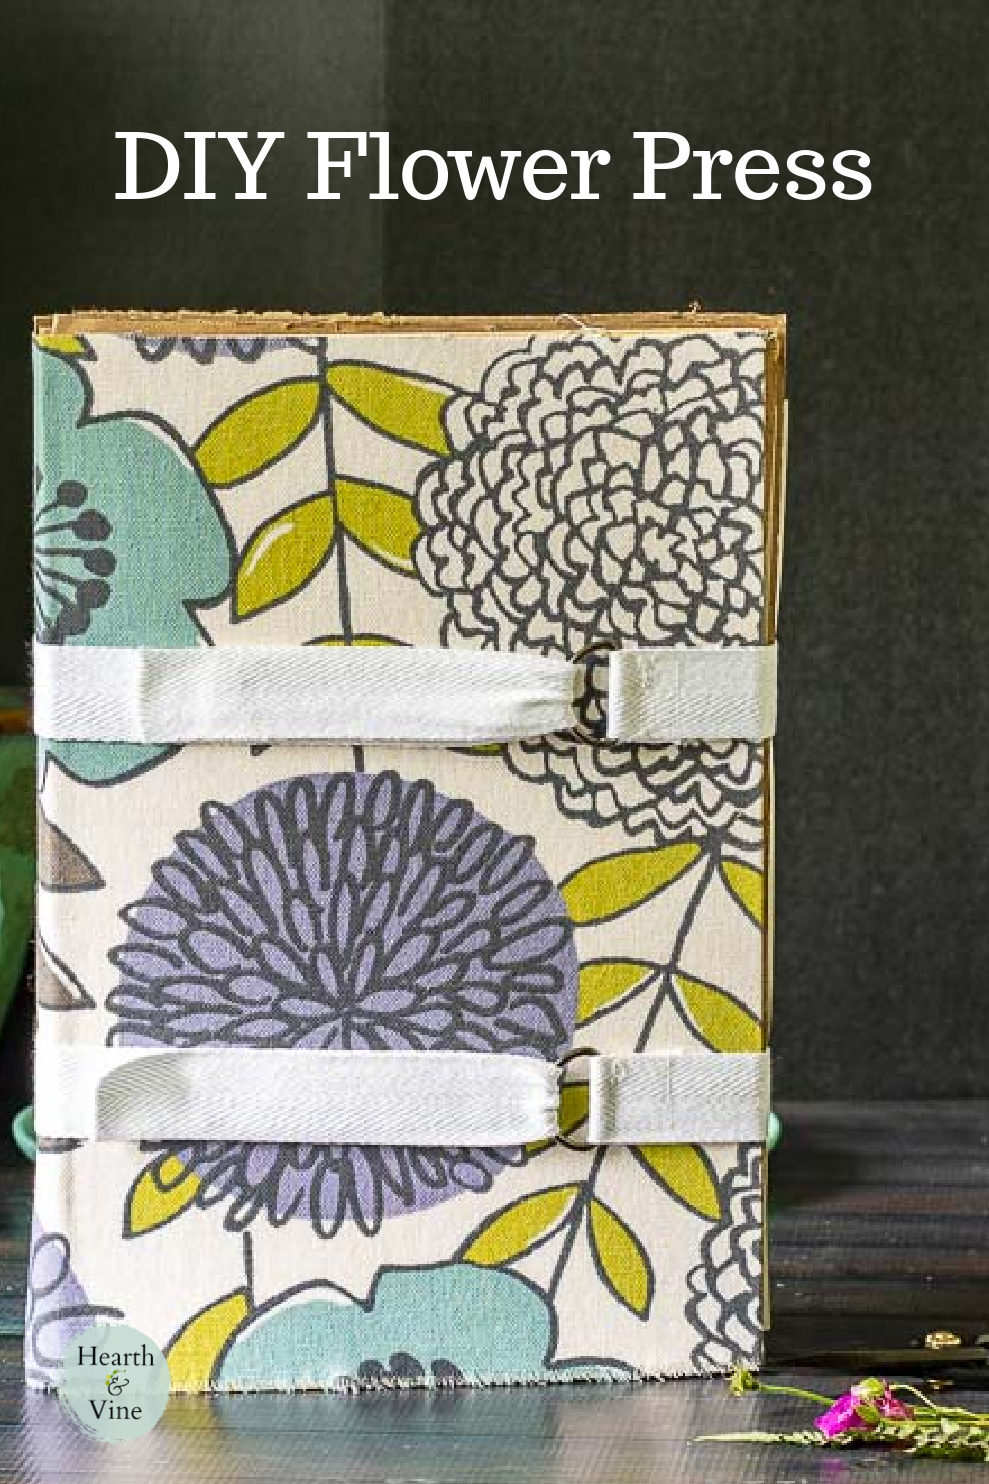 Modern floral fabric covered flower press book with canvas tape enclosure.